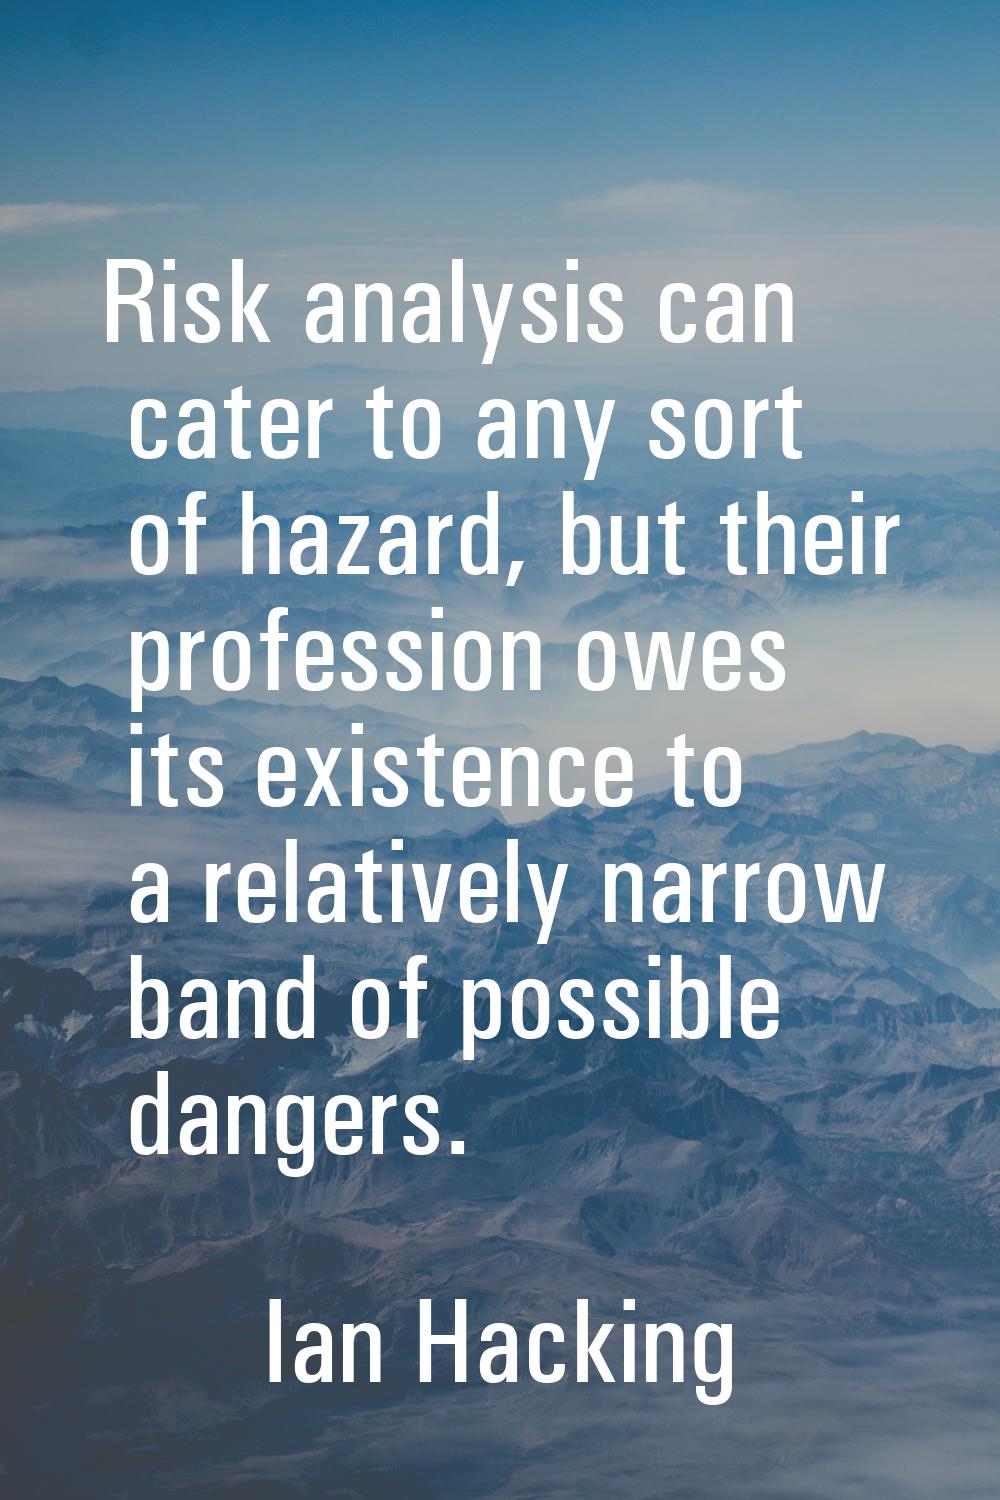 Risk analysis can cater to any sort of hazard, but their profession owes its existence to a relativ